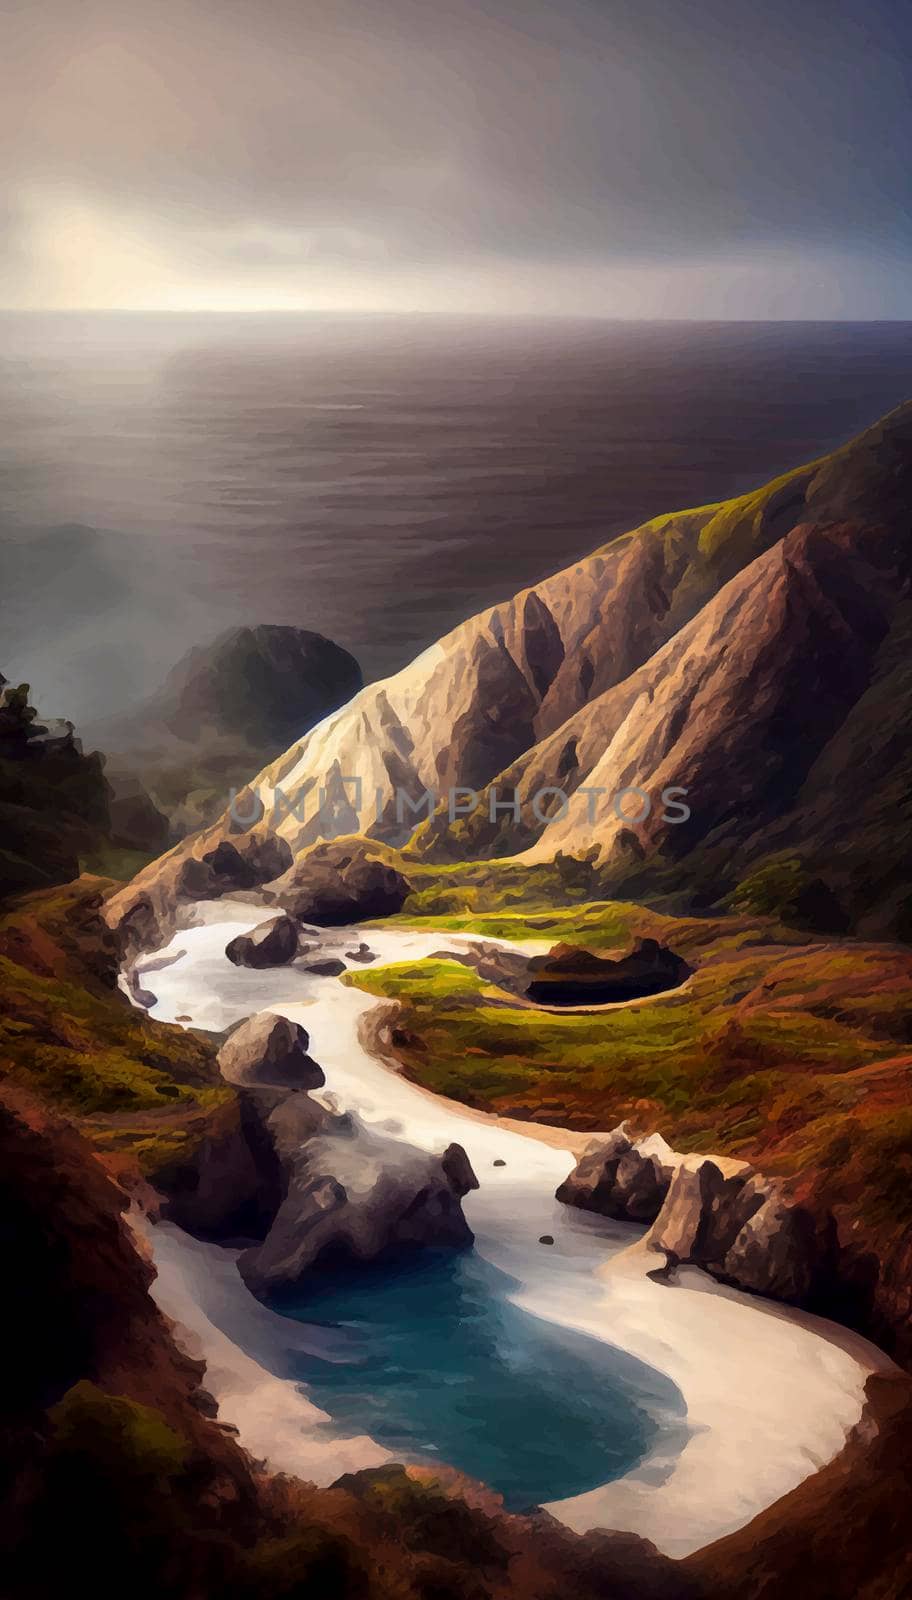 Illustration of peaceful landscape with a natural setting, cinematic and beautiful landscape illustration